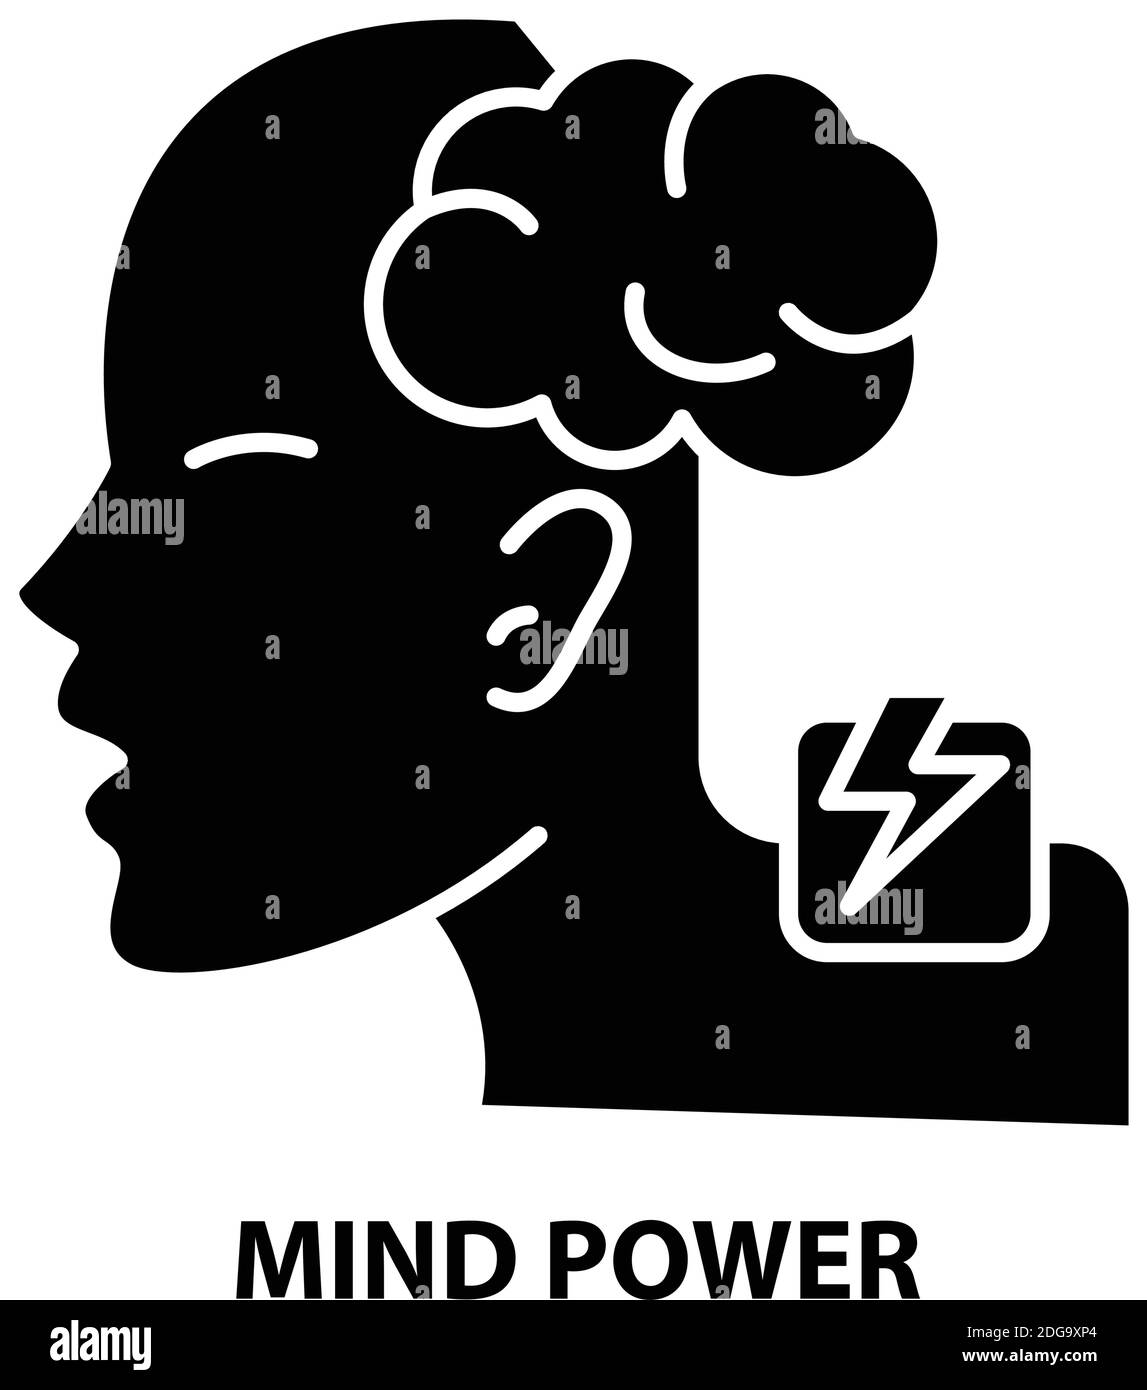 mind power icon, black vector sign with editable strokes, concept illustration Stock Vector